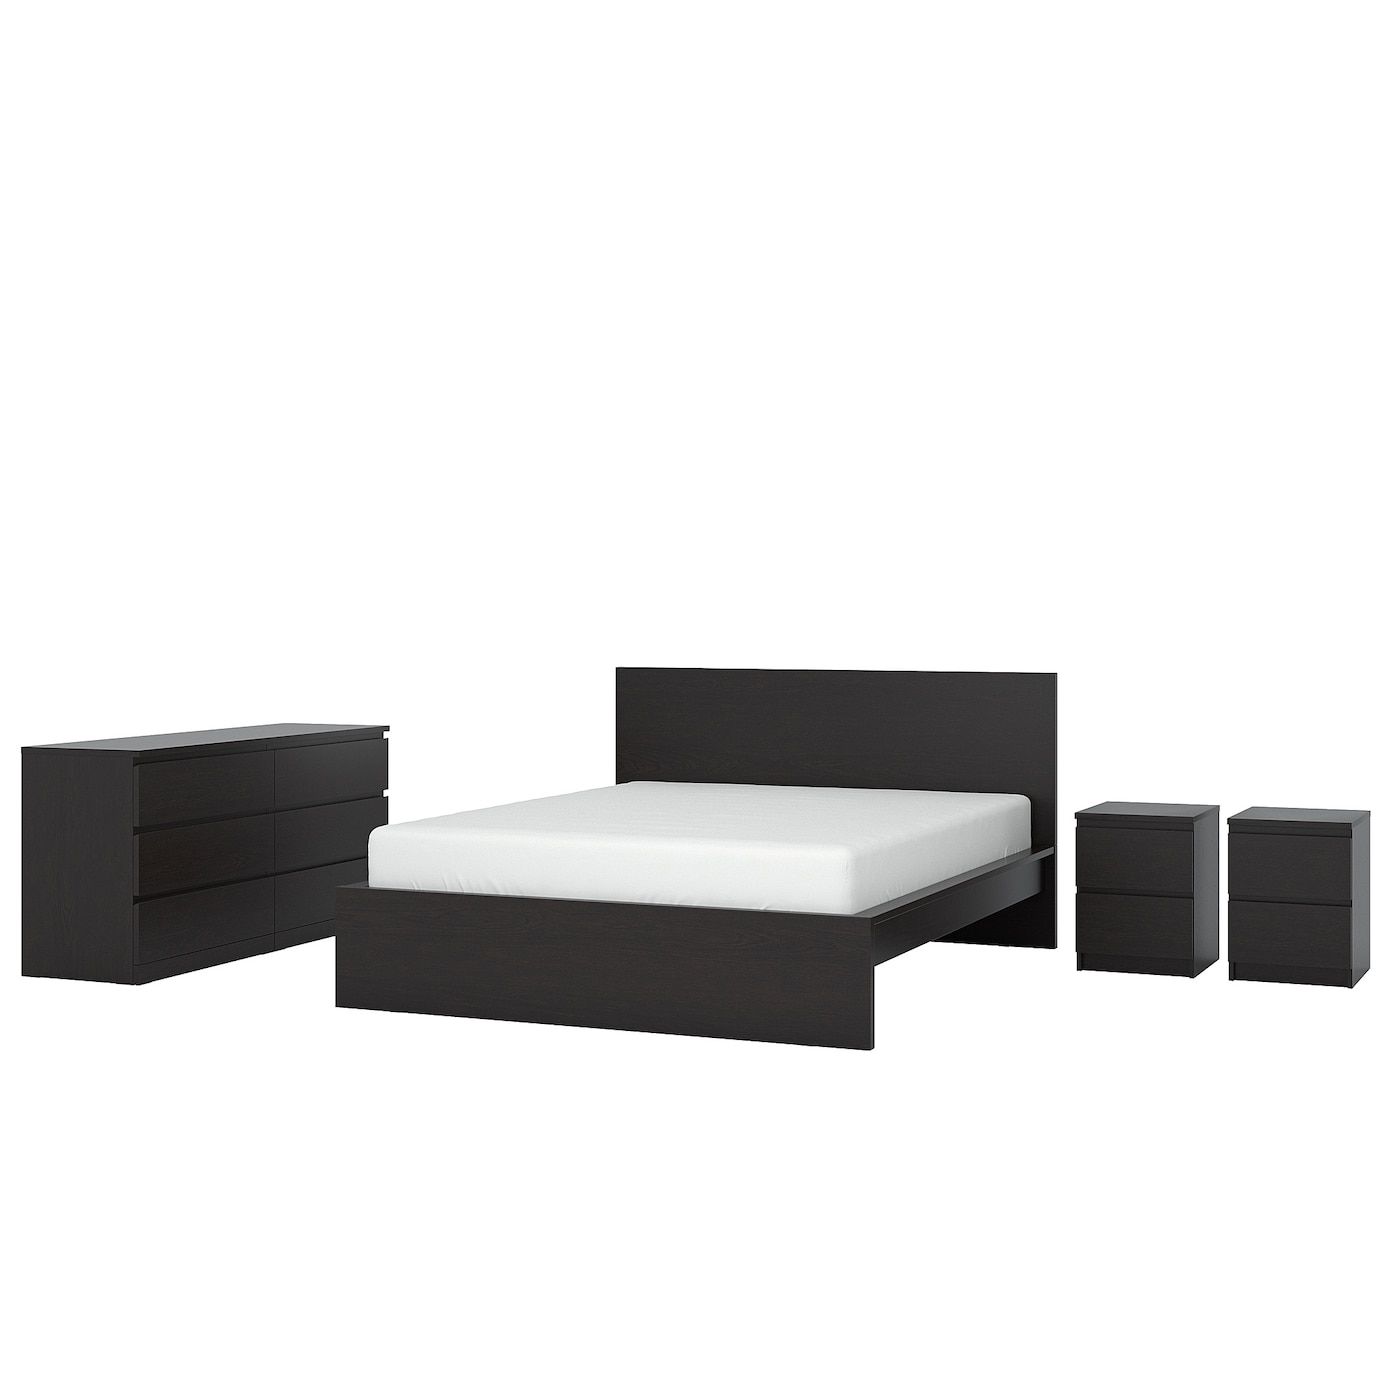 Black Bed Designs: Create a Sleek and Sophisticated Bedroom with Black Bed Designs